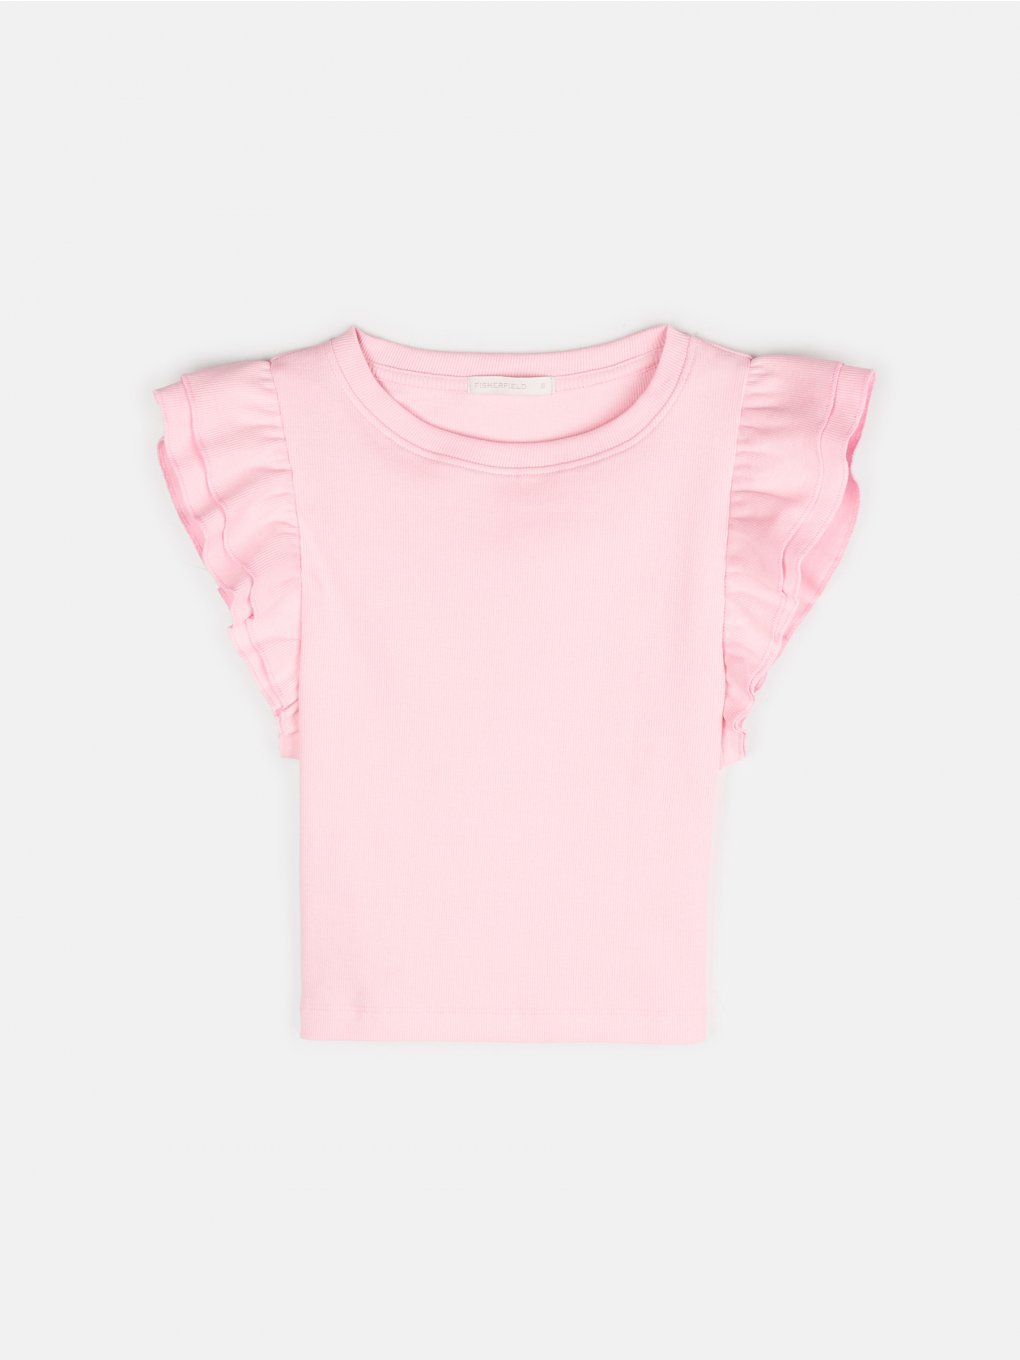 Ribbed t-shirt with ruffles